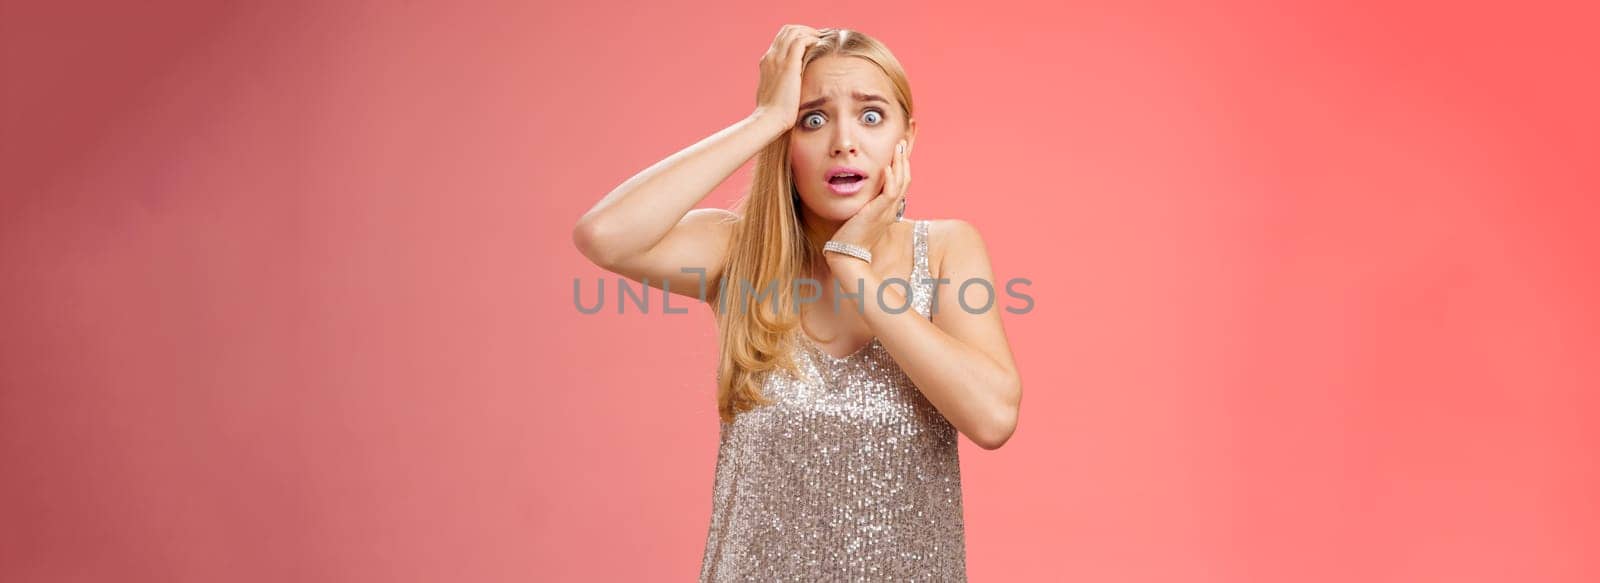 Shocked frightened insecure panicking woman blond hairstyle in silver dress touch head pop eyes afraid scared seing terrifying crime standing stupor speechless gasping shook, red background.